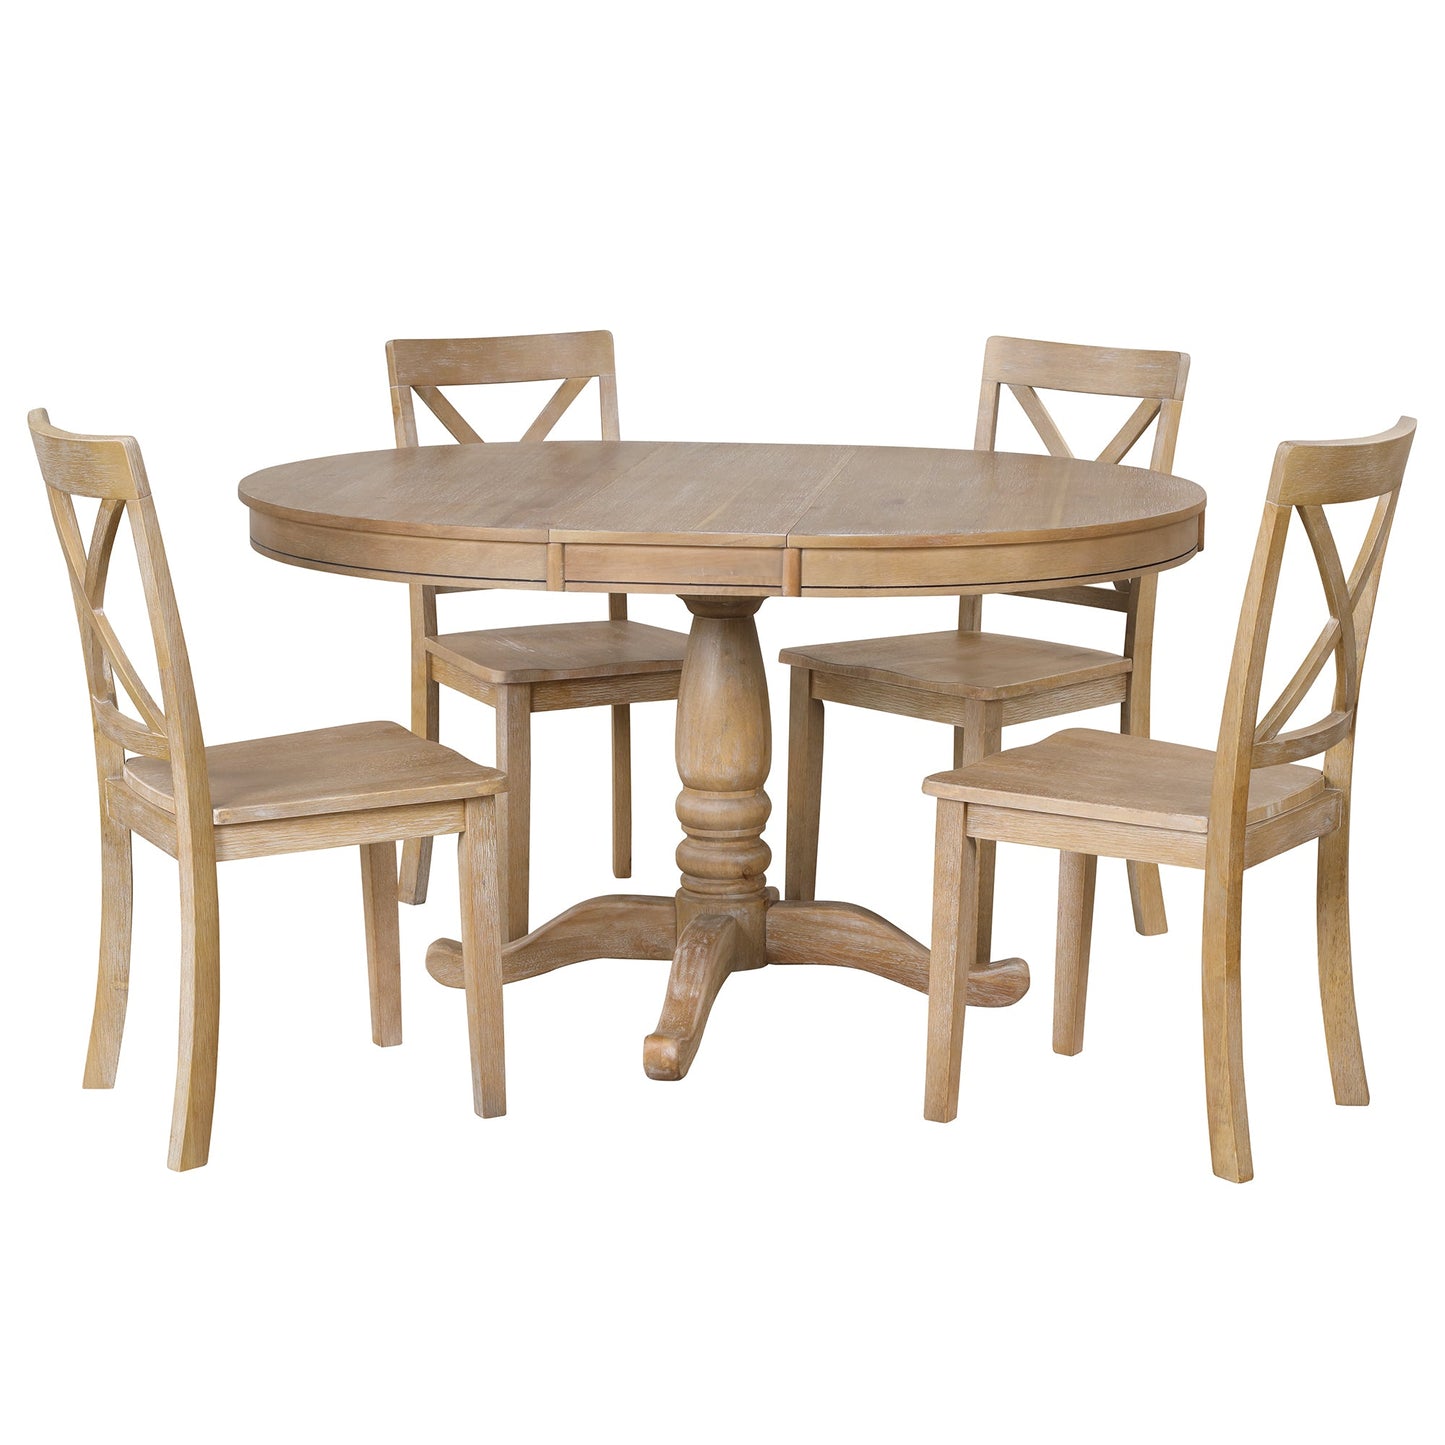 Modern Dining Table Set for 4,Round Table and 4 Kitchen Room Chairs,5